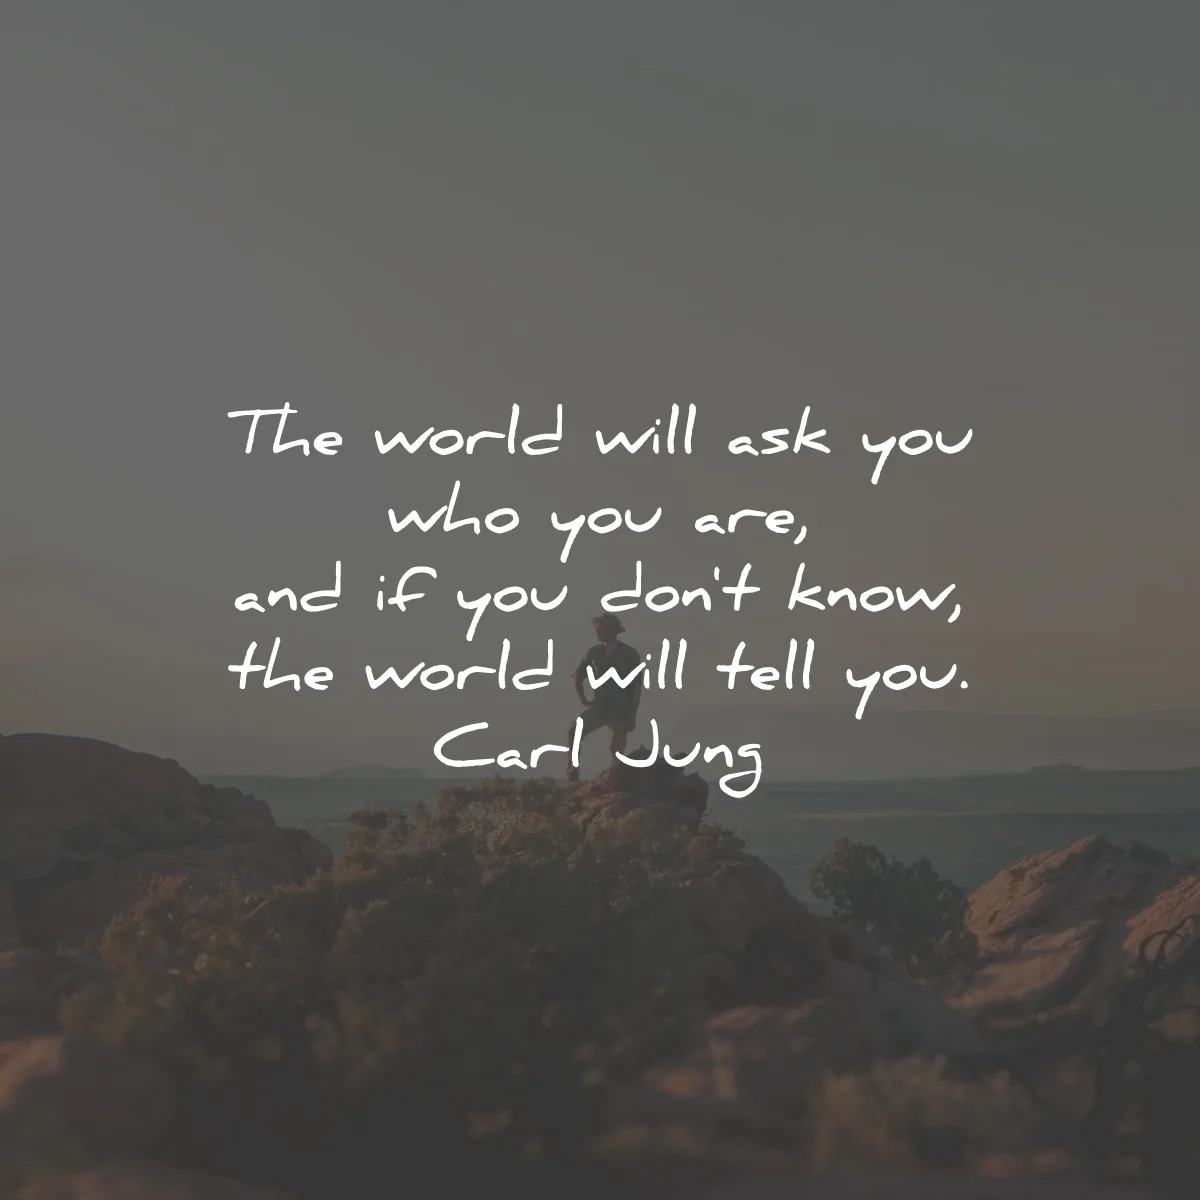 carl jung quotes world ask who are know tell wisdom